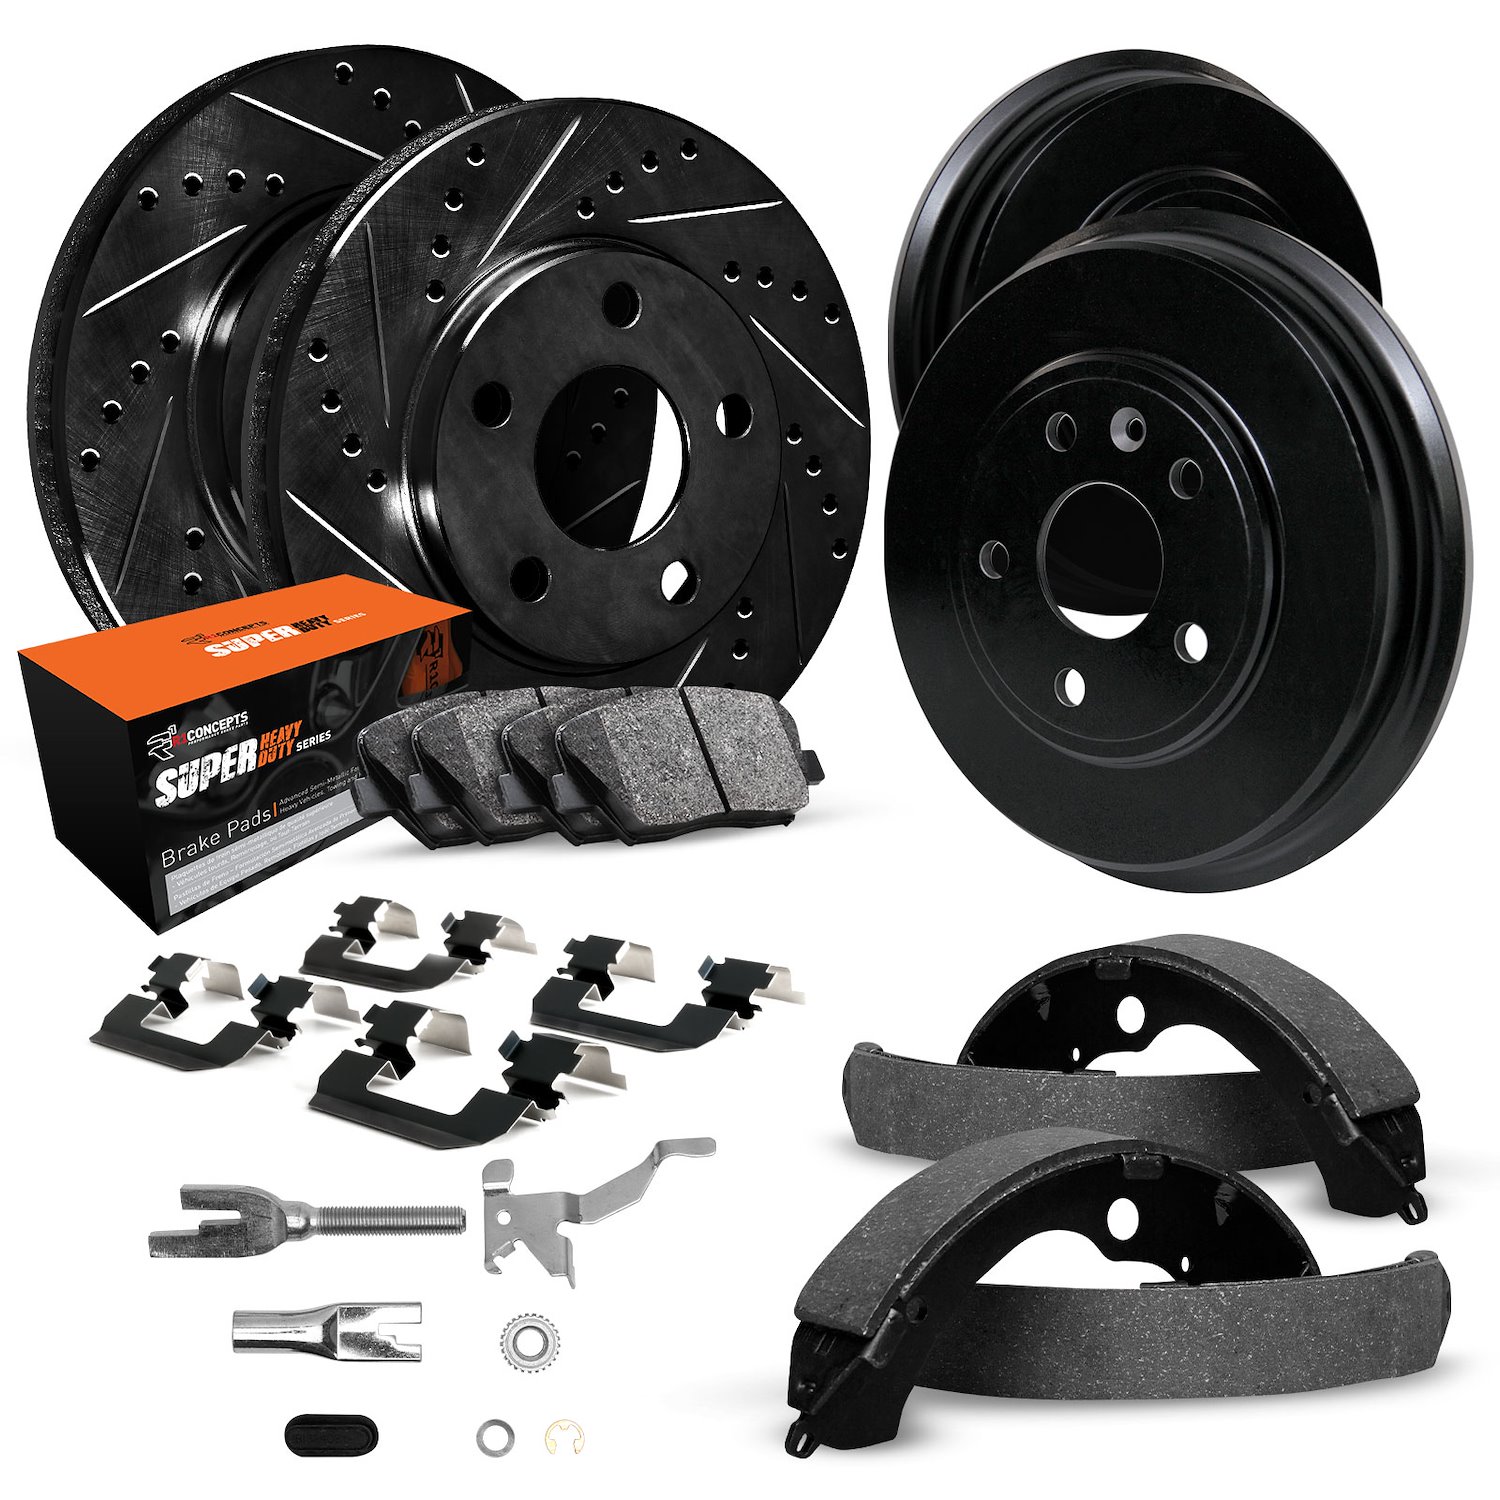 E-Line Drilled/Slotted Black Rotor & Drum Set w/Super-Duty Pads, Shoes, Hardware/Adjusters, 1971-1971 GM